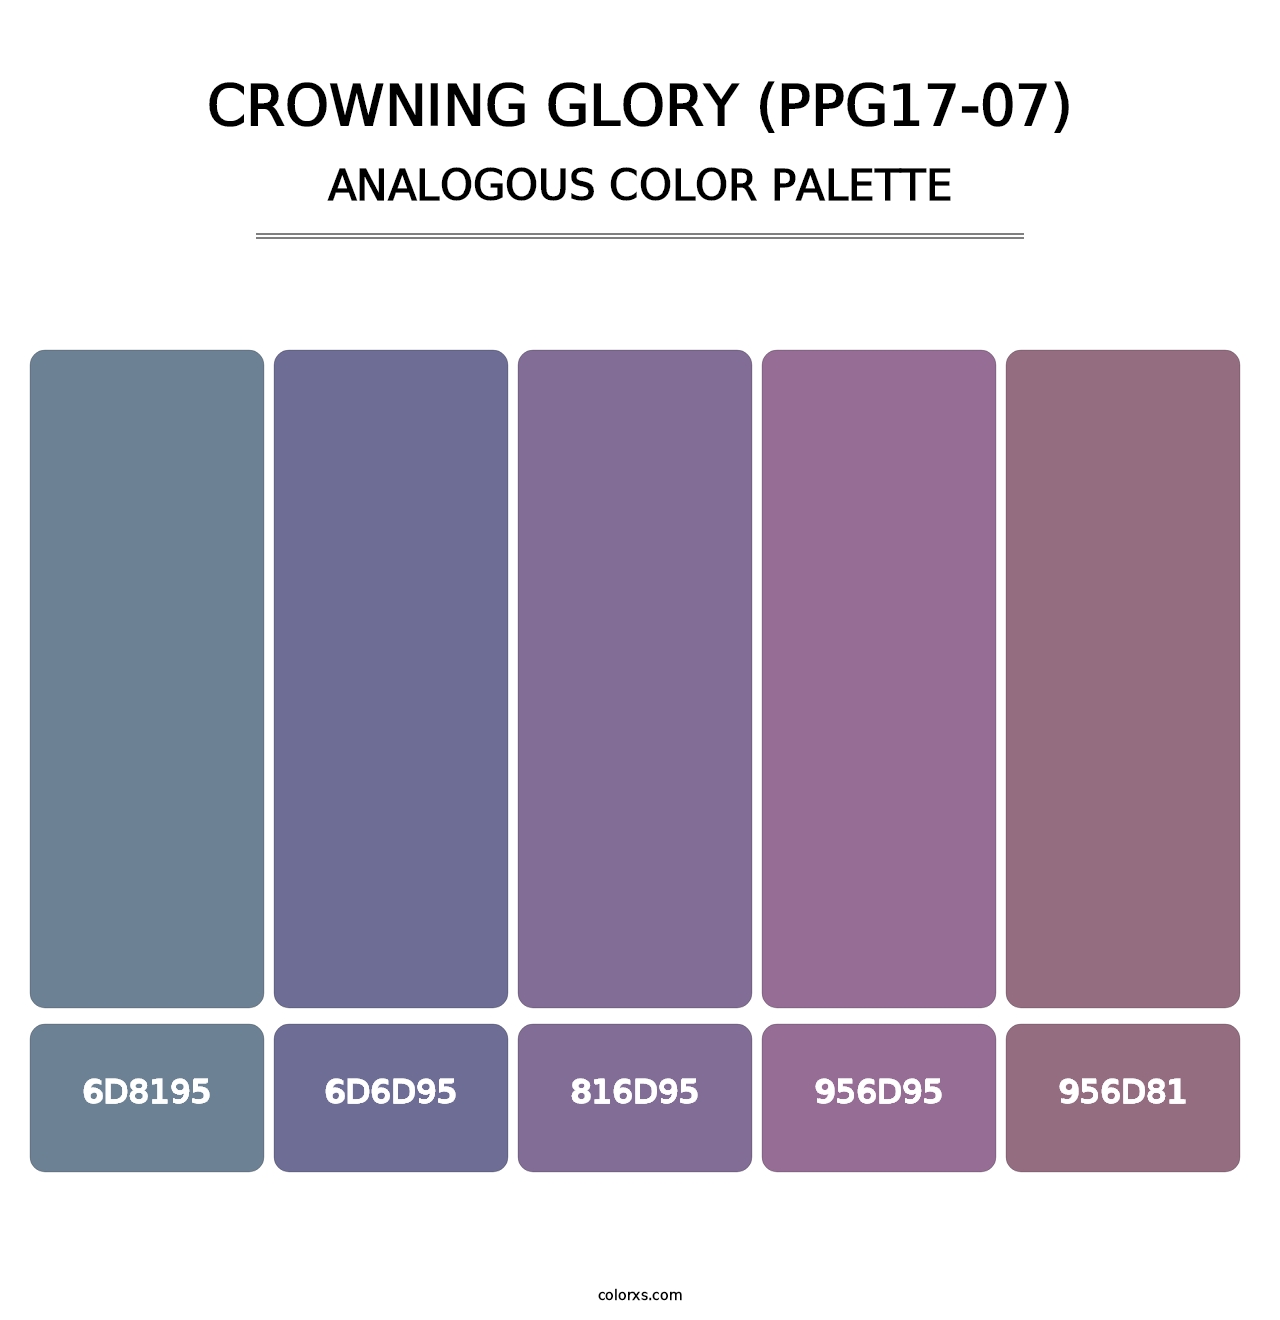 Crowning Glory (PPG17-07) - Analogous Color Palette